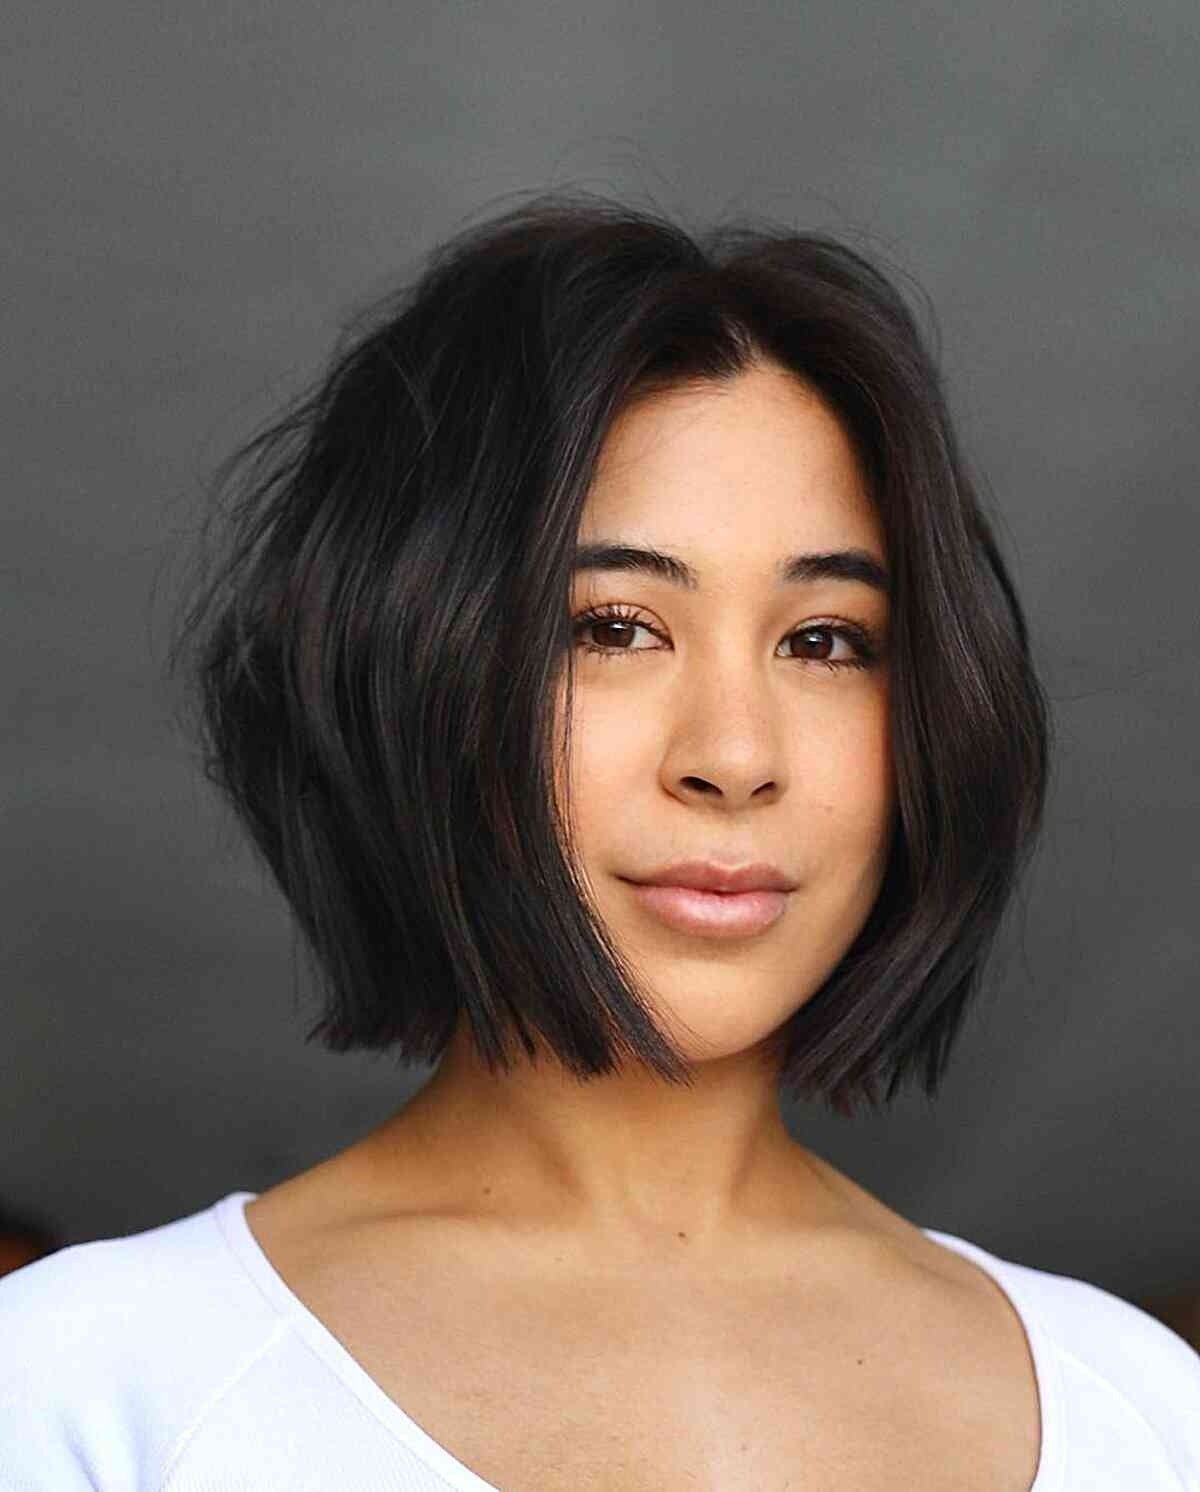 Chin-Length Blunt Cut Bob for Finer Hair and a middle part